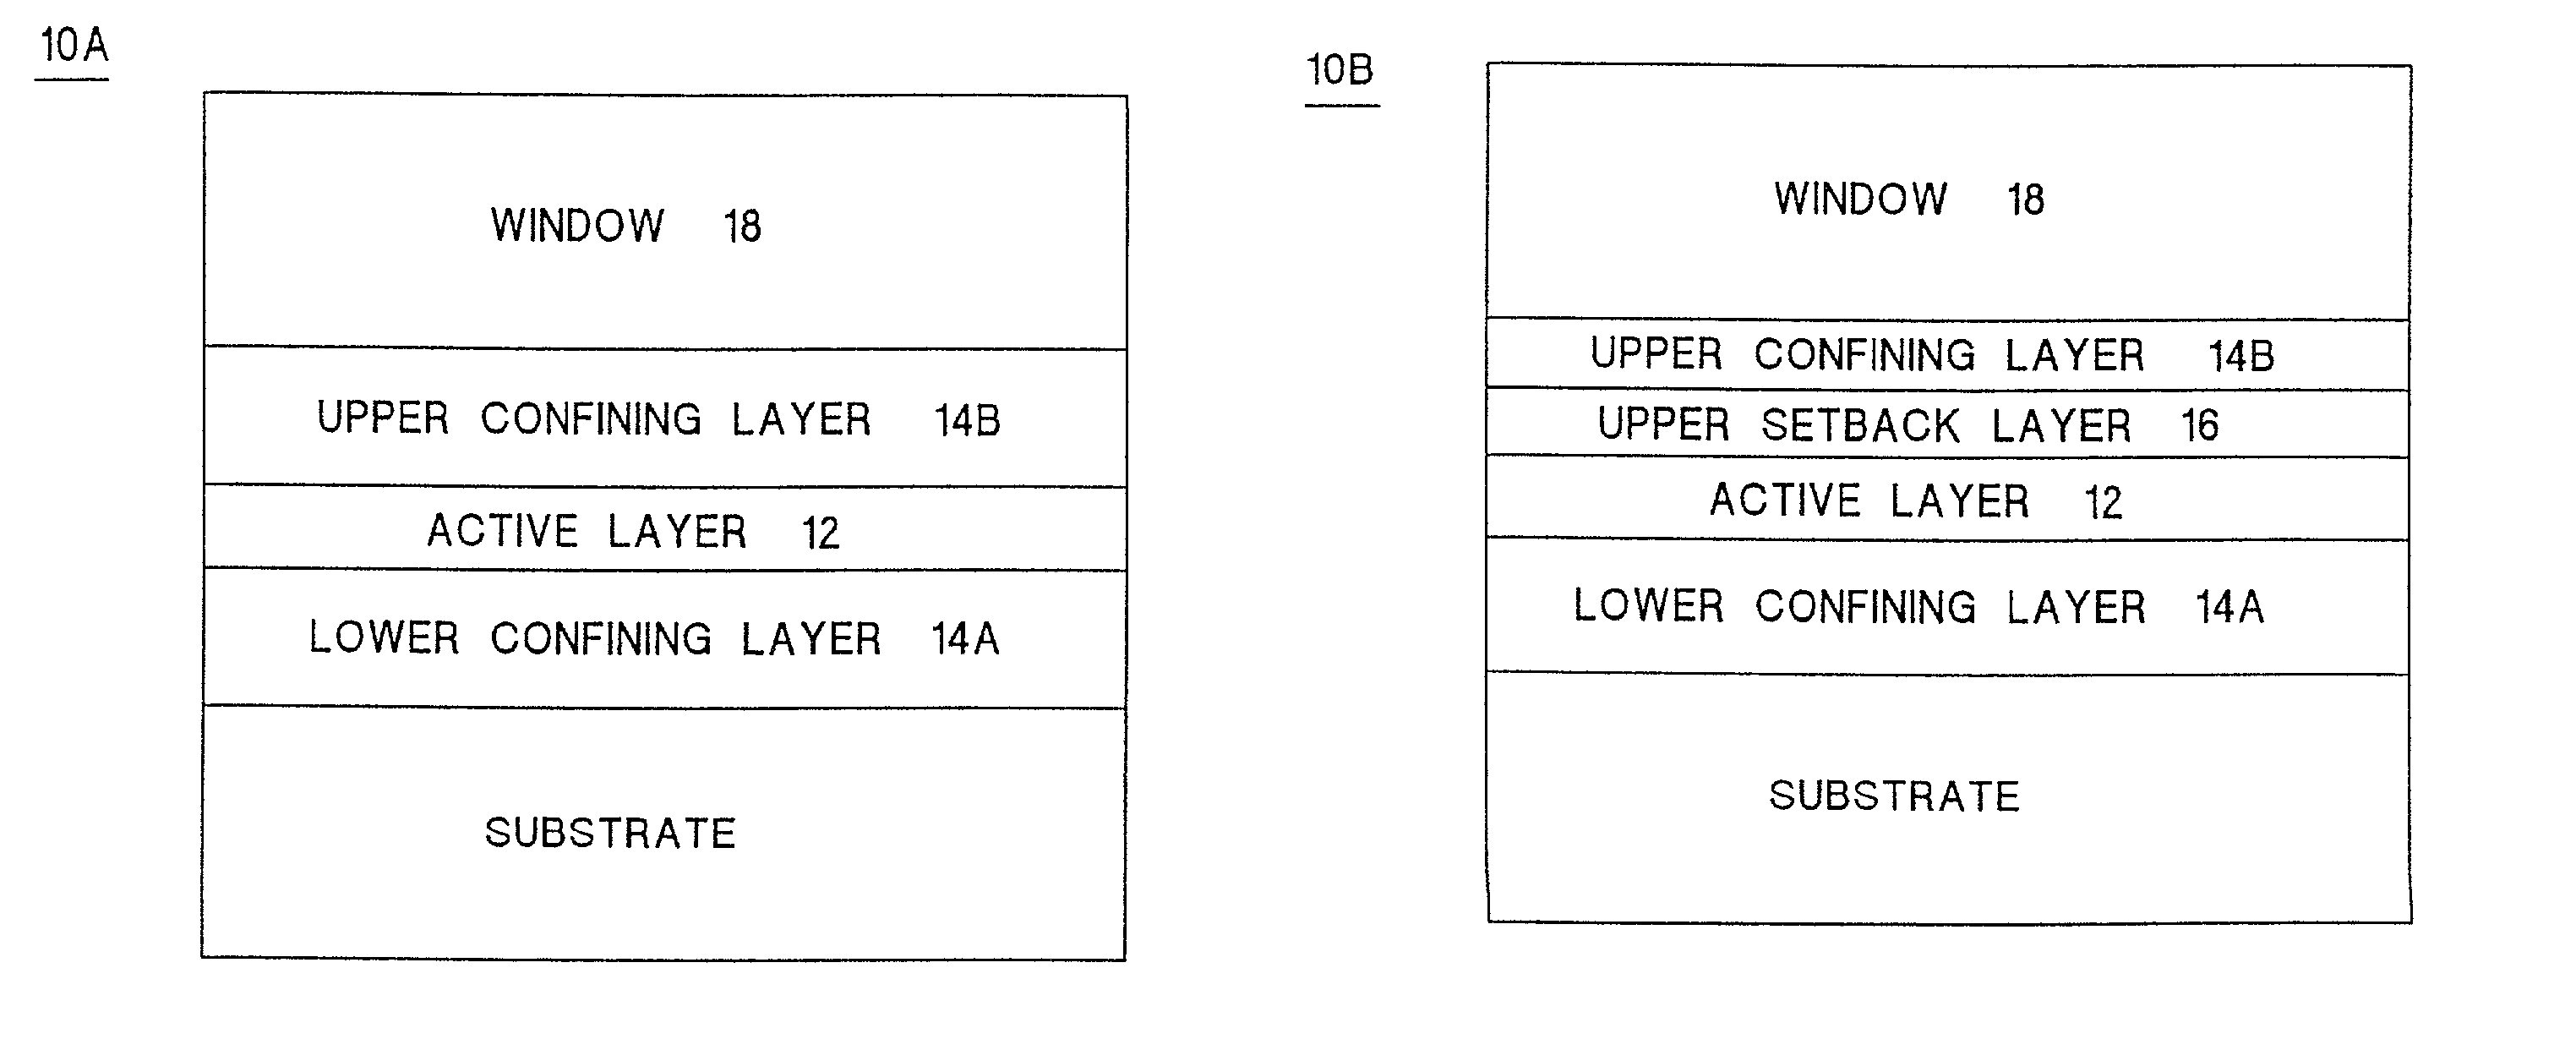 Lll-phosphide light emitting devices with thin active layers